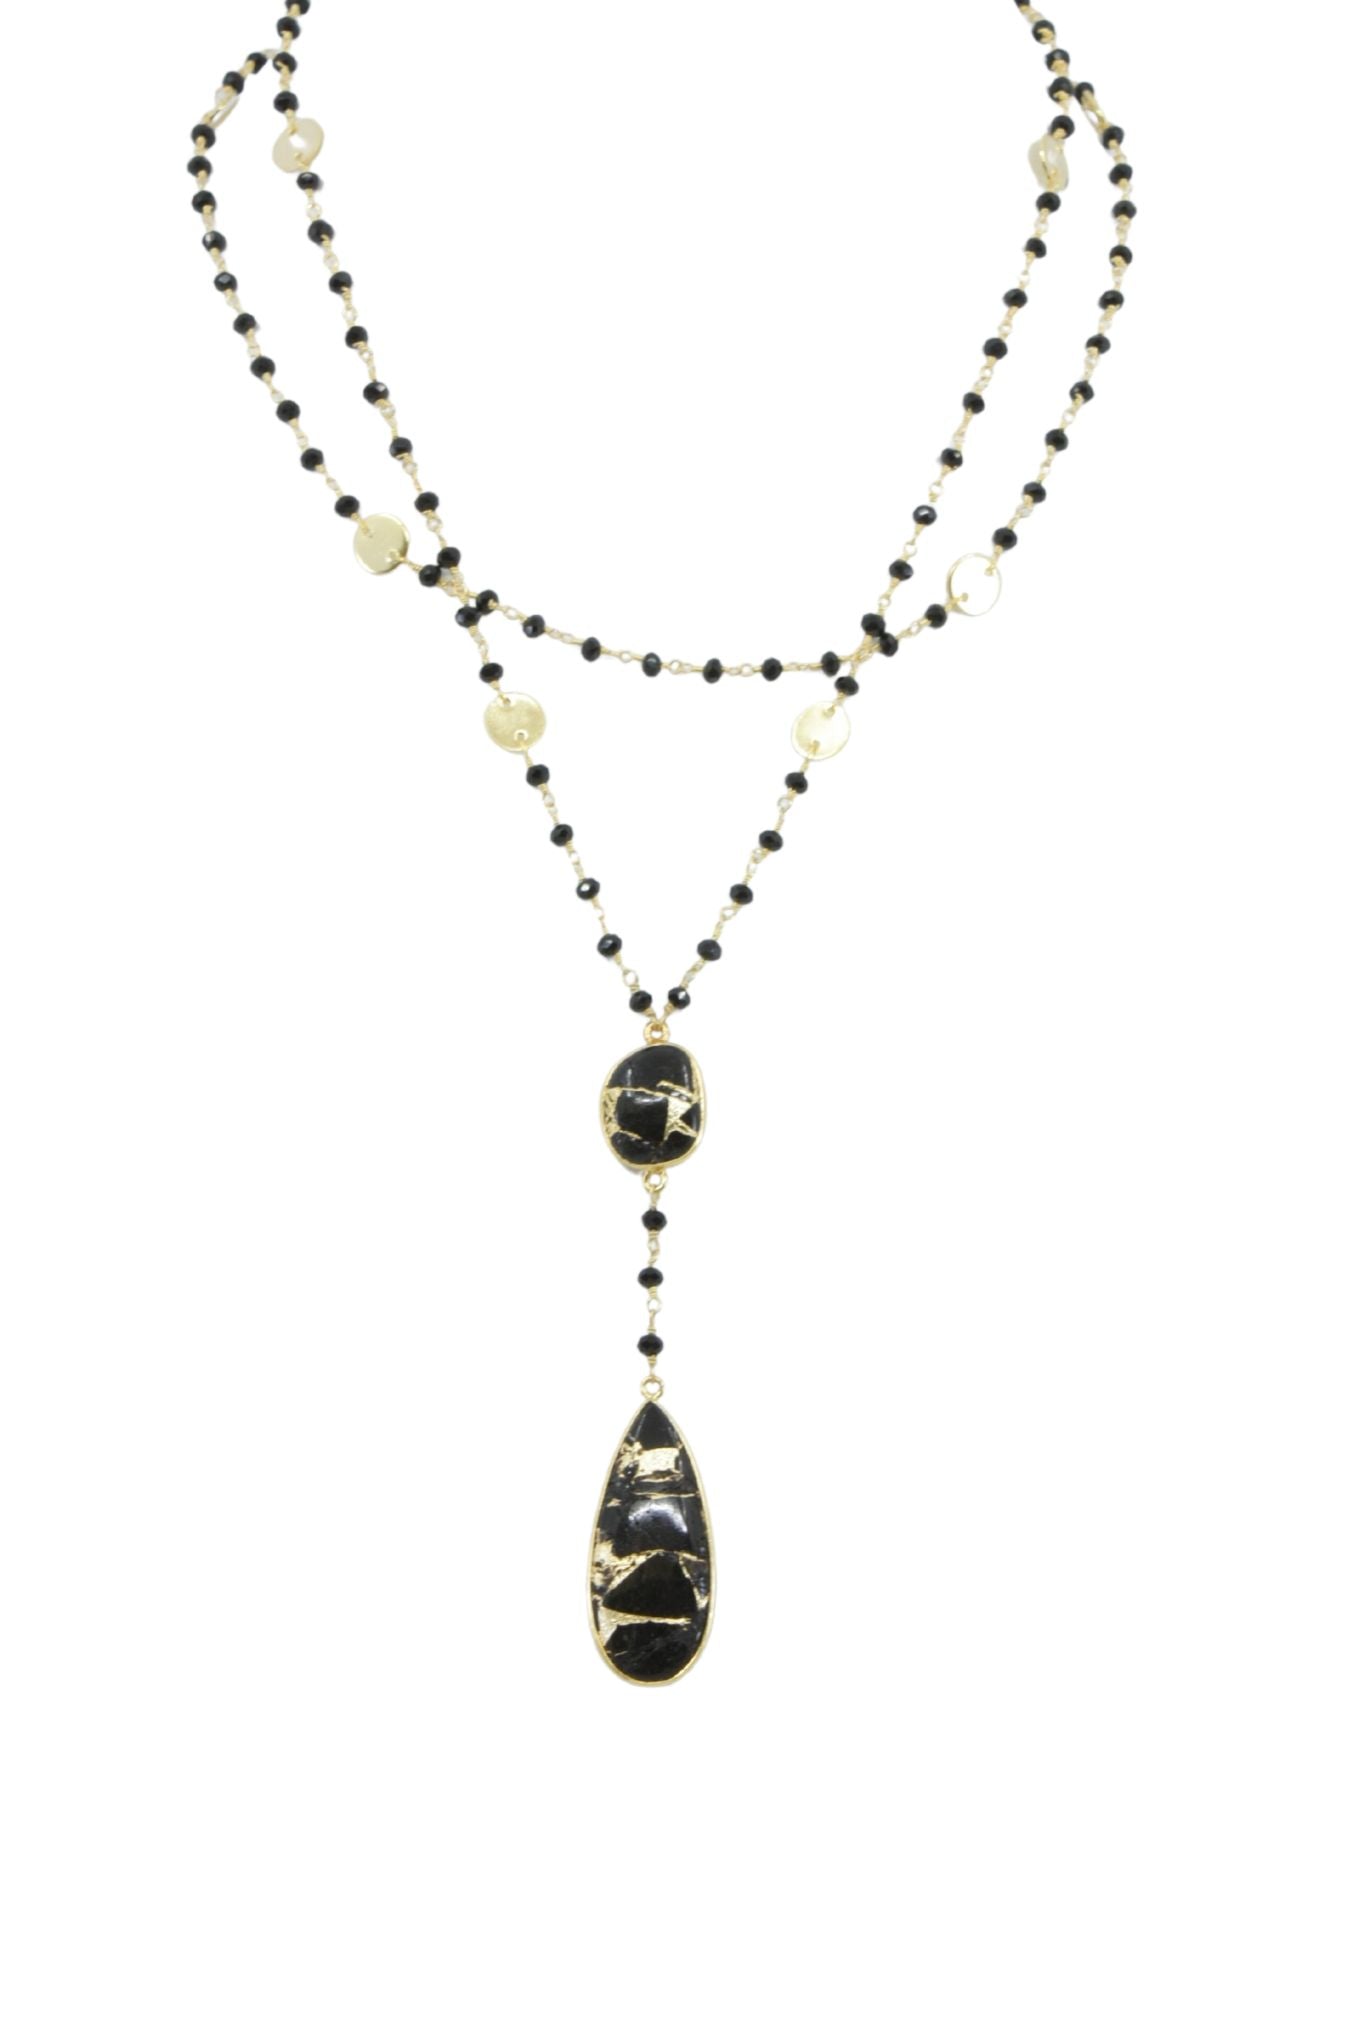 Double Diana Denmark Necklace in Black Onyx with Black Mojave Copper Turquoise Drop